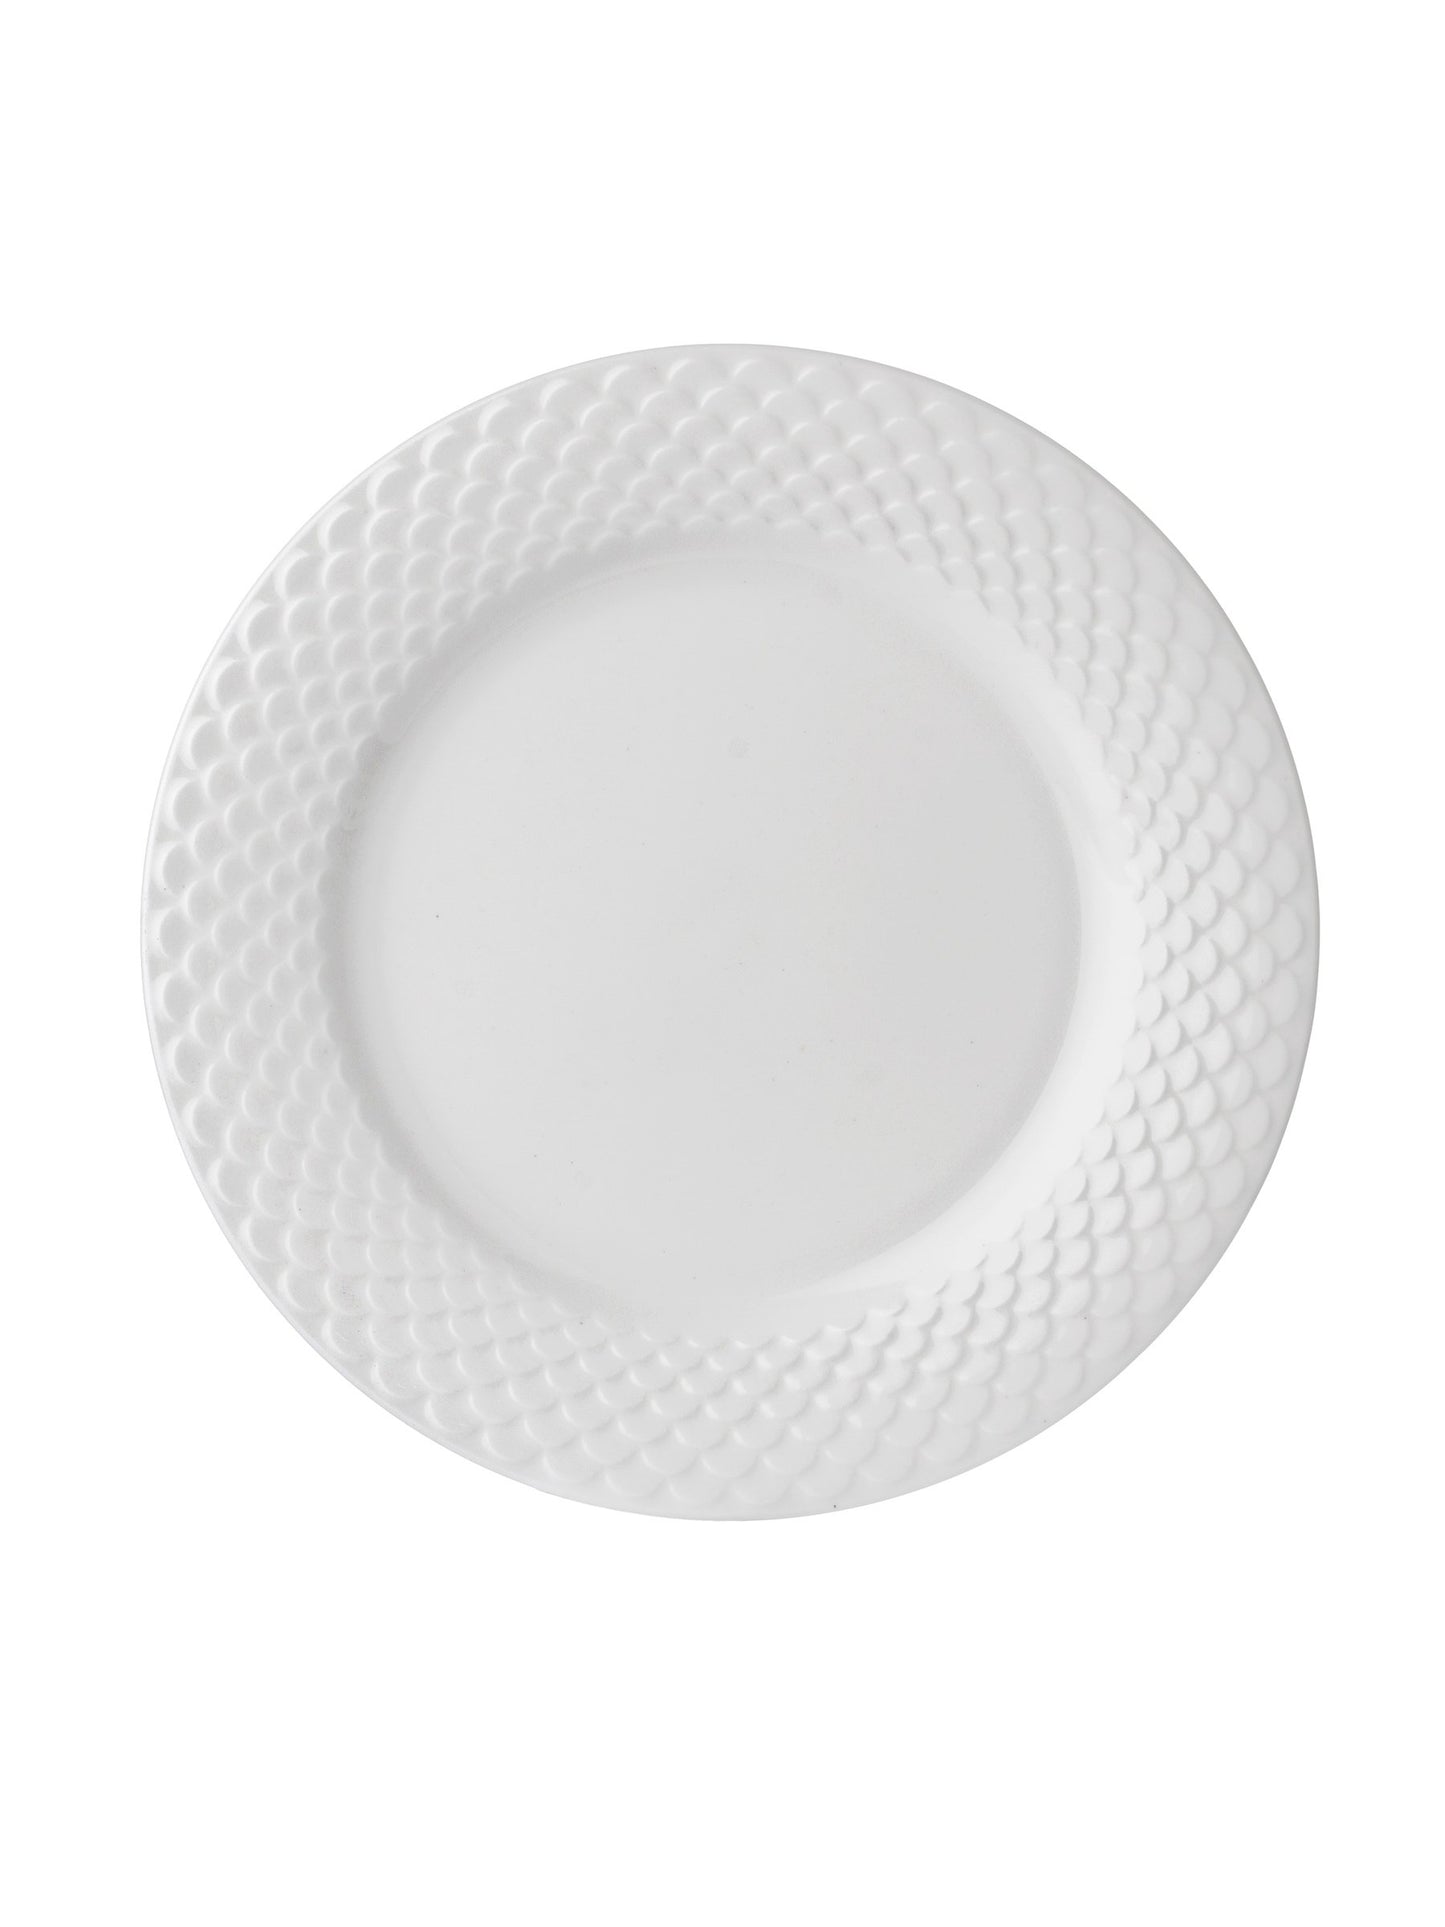 Clay Craft Basic Dinner Plate Ripple 4 Piece 10.5" Plain White - Clay Craft India